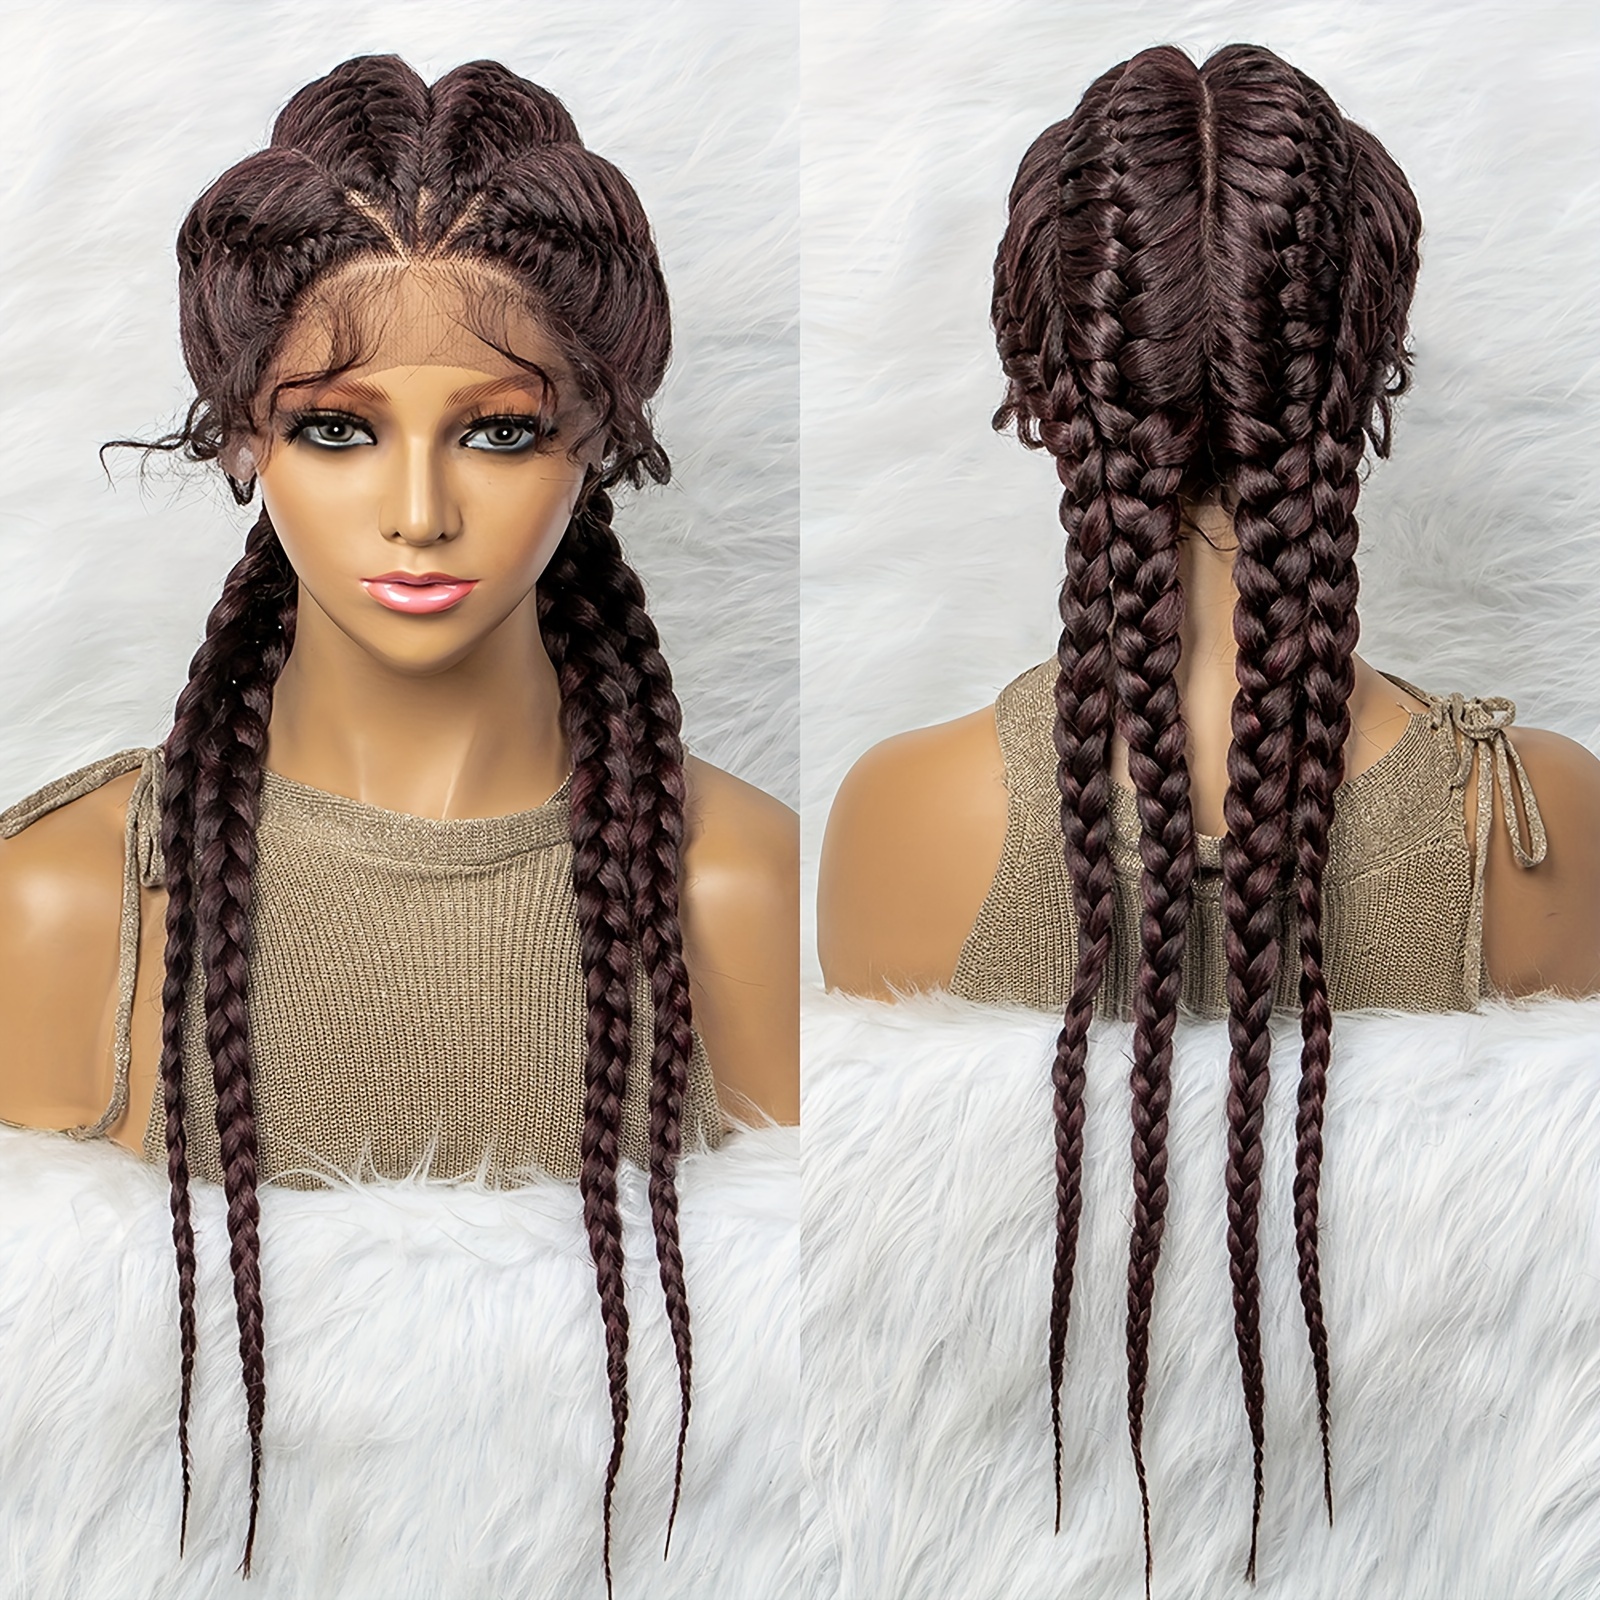 24 inches braided lace wigs for women lightweight braiding synthetic high ponytails lace braids wig